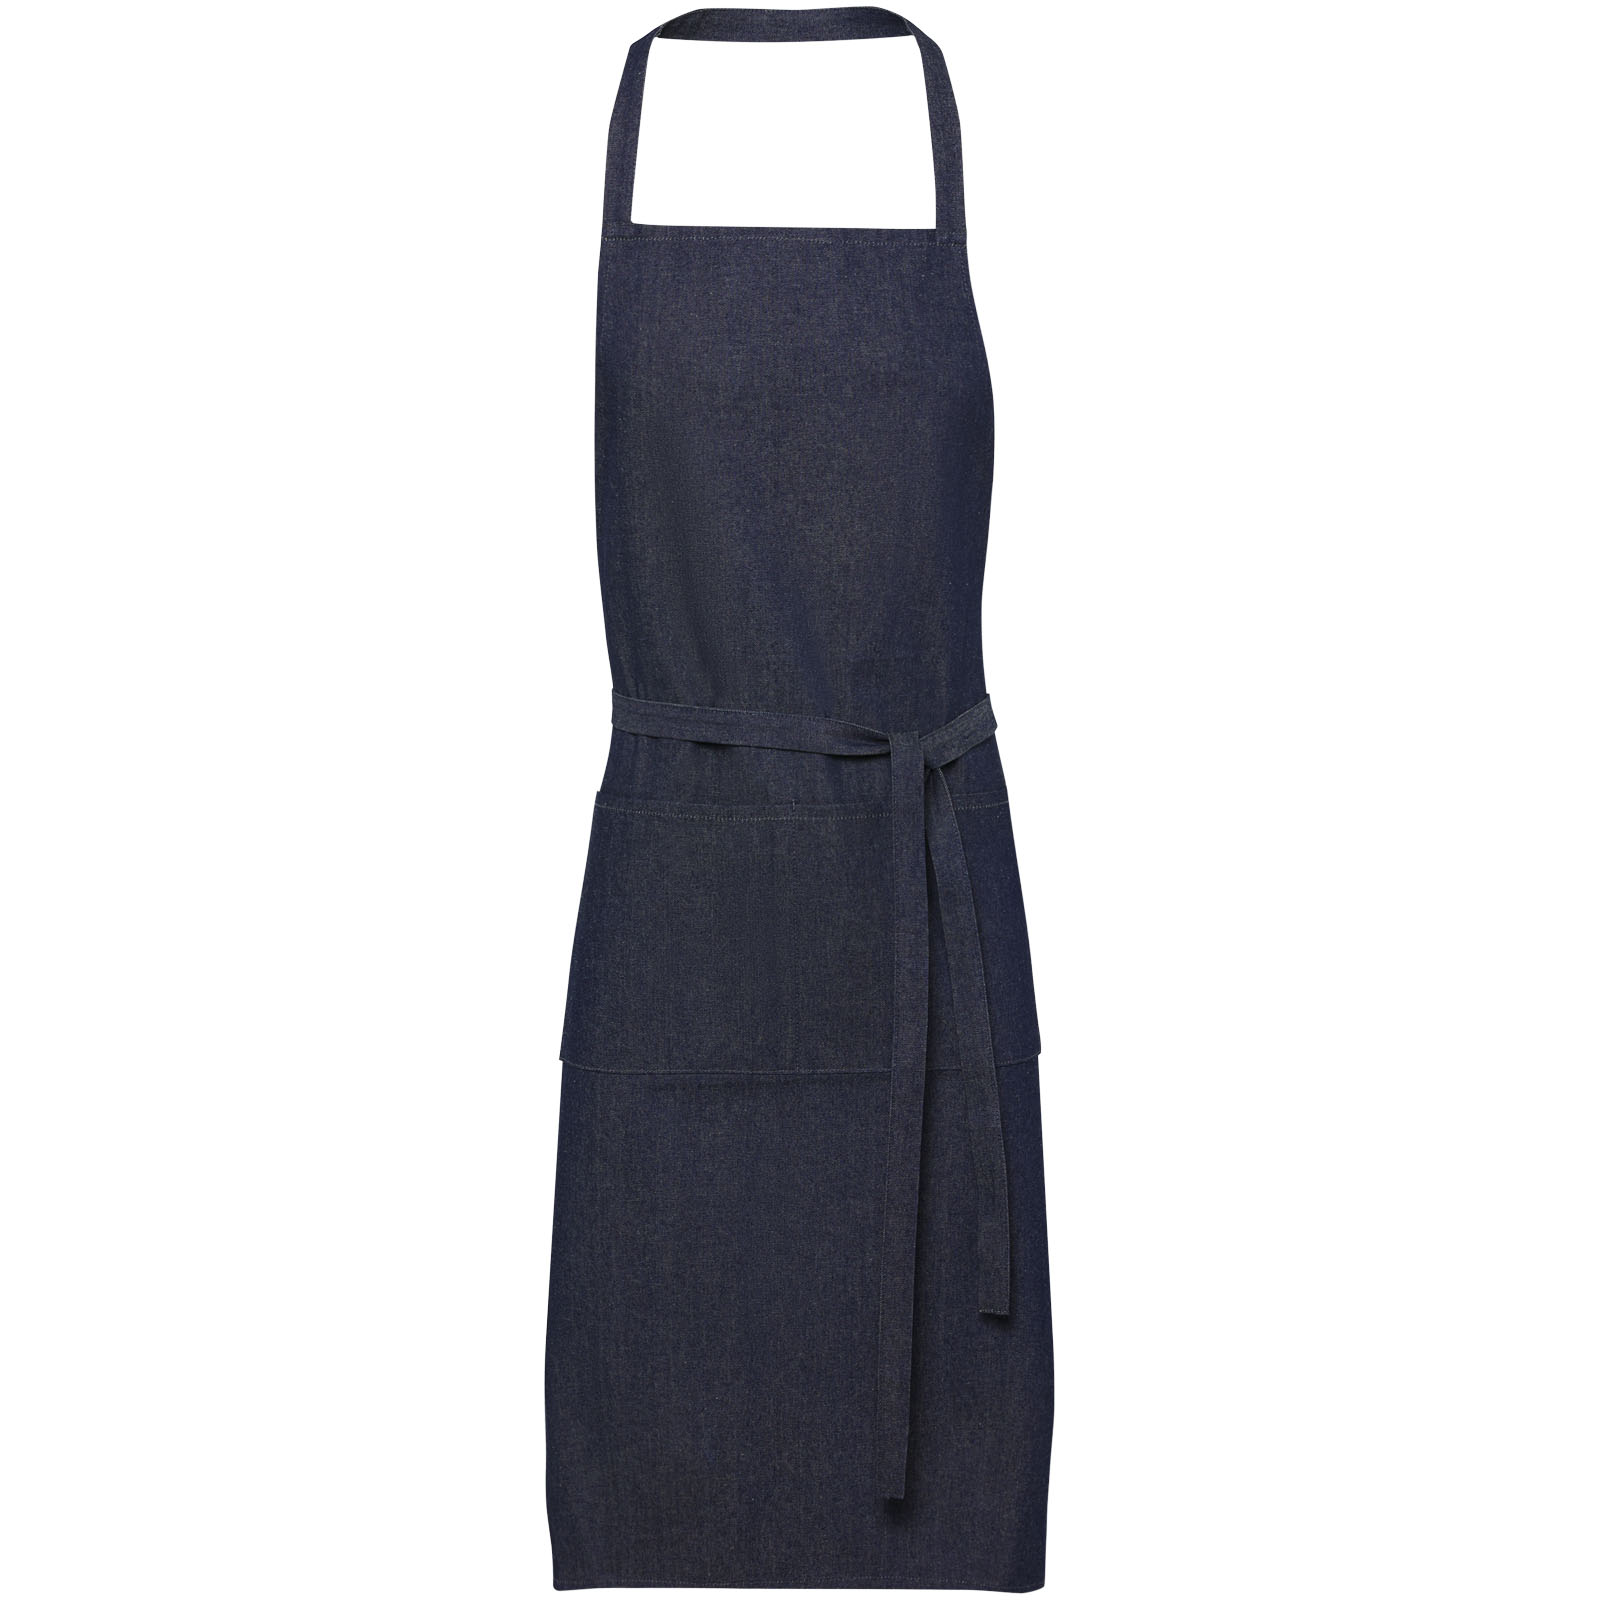 Advertising Aprons - Jeen 200 g/m² recycled denim apron - 0